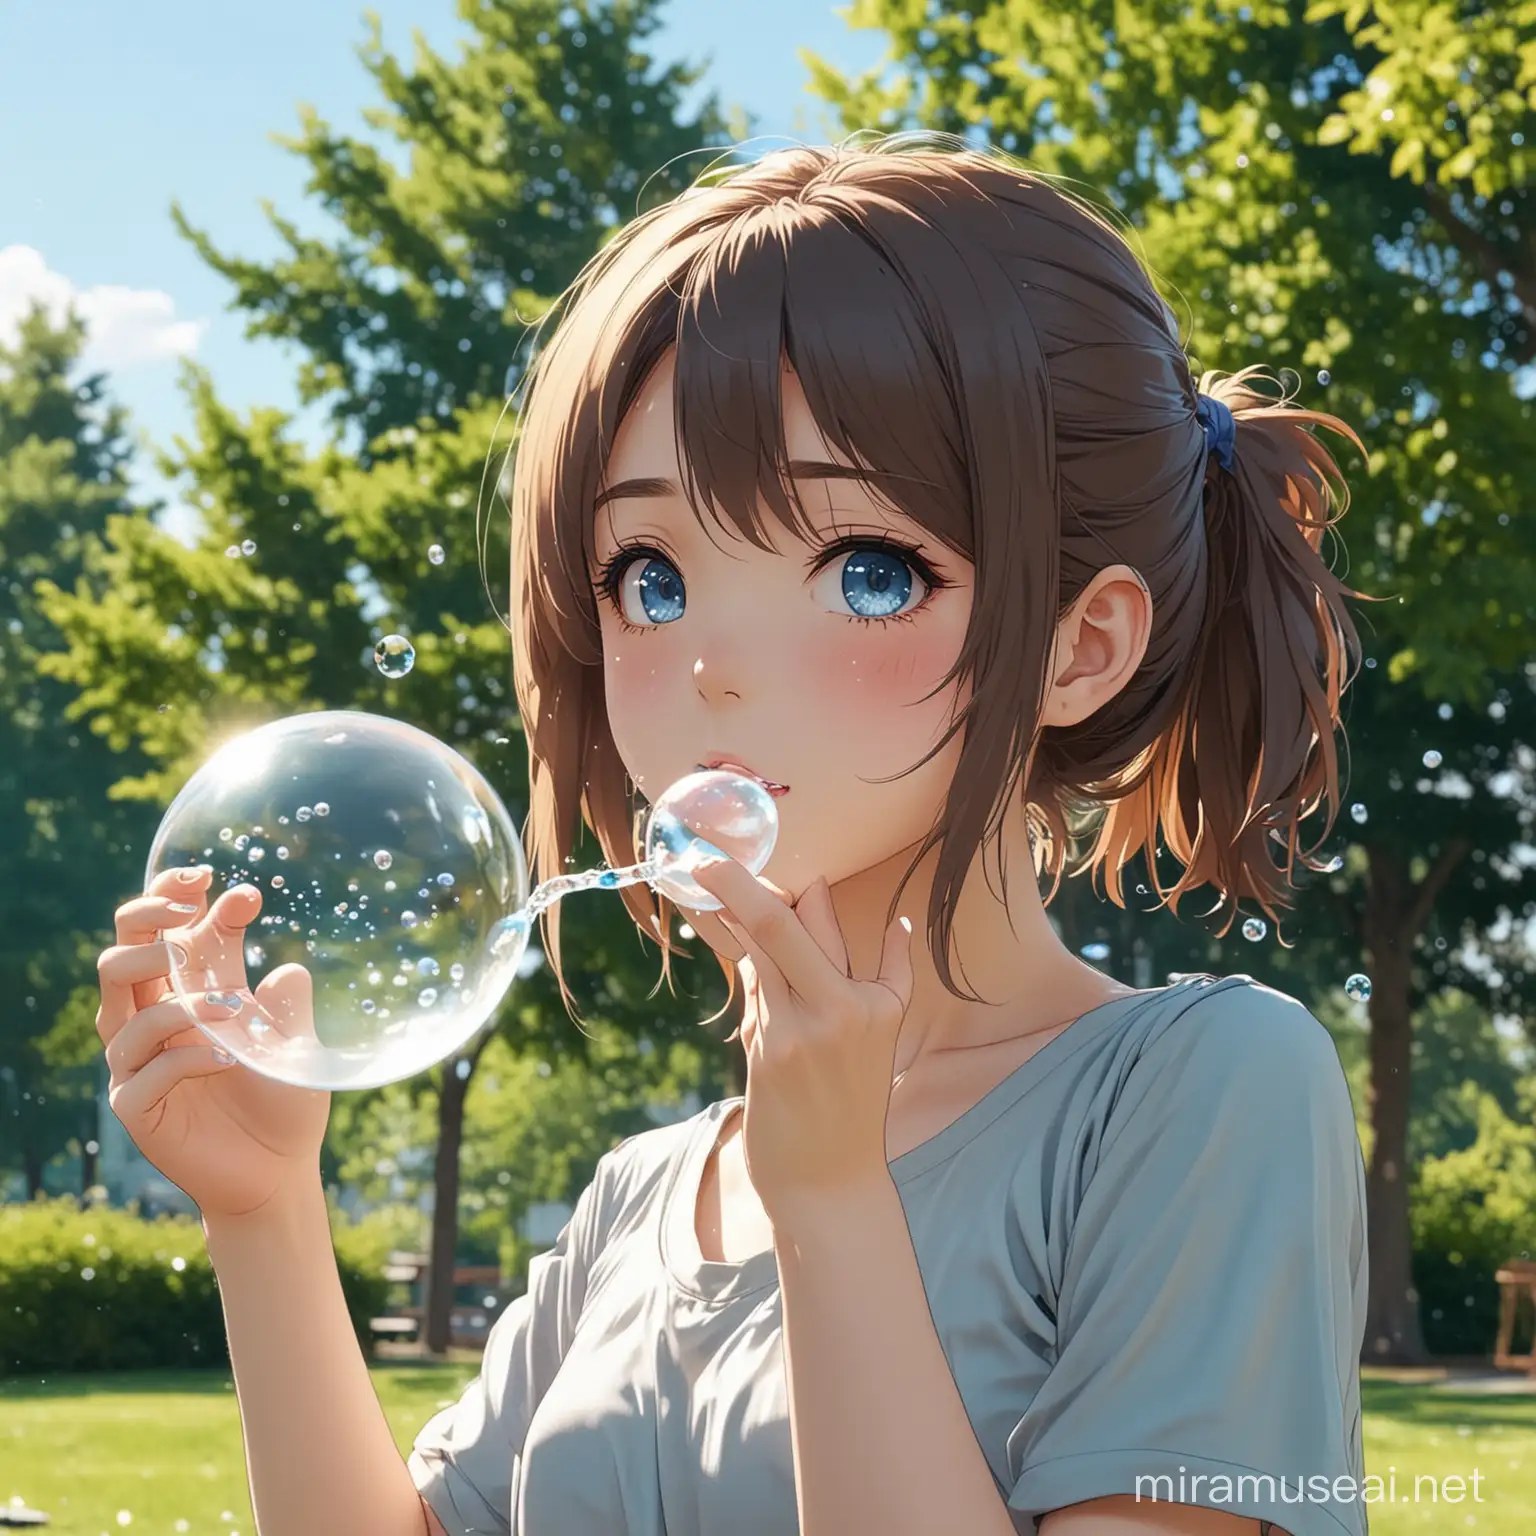 Anime Girl Blowing Water Bubble in Tranquil Park Scene